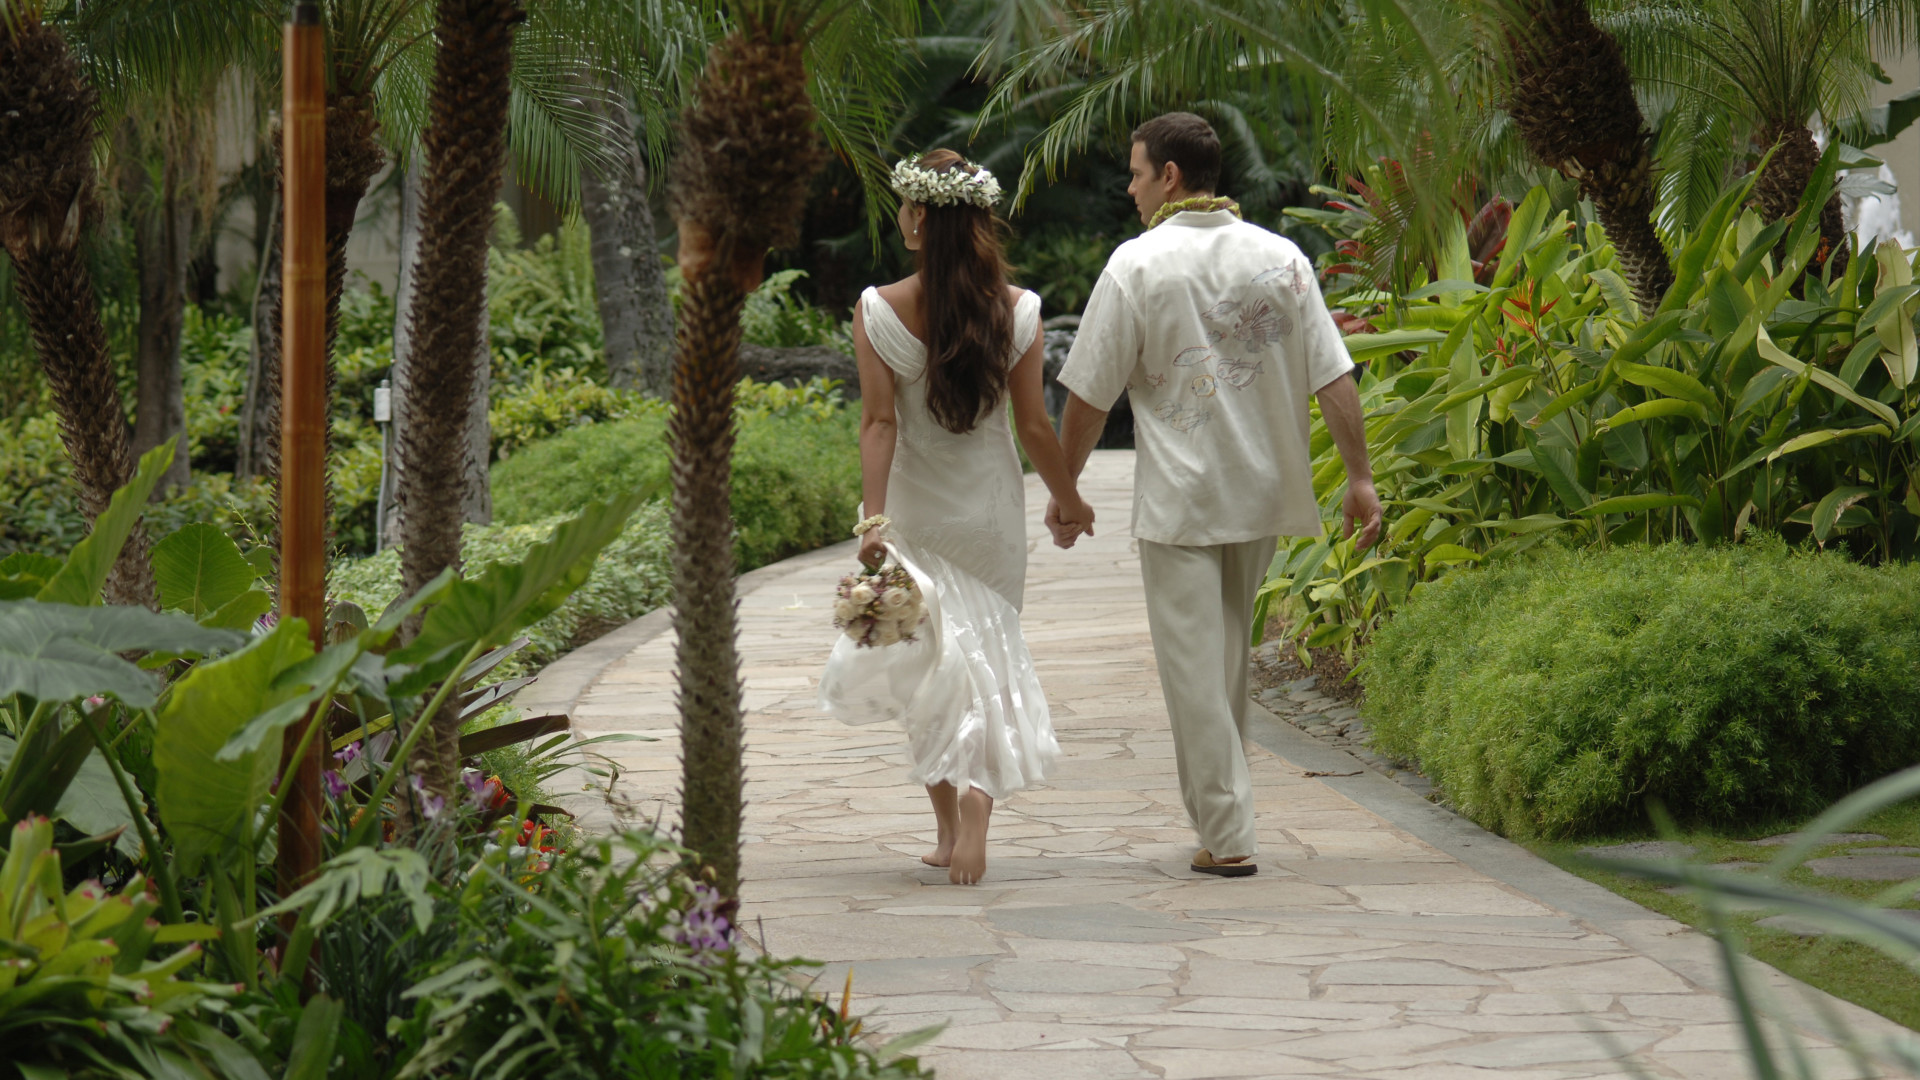 Couple Walking in a Garden Holding Hands